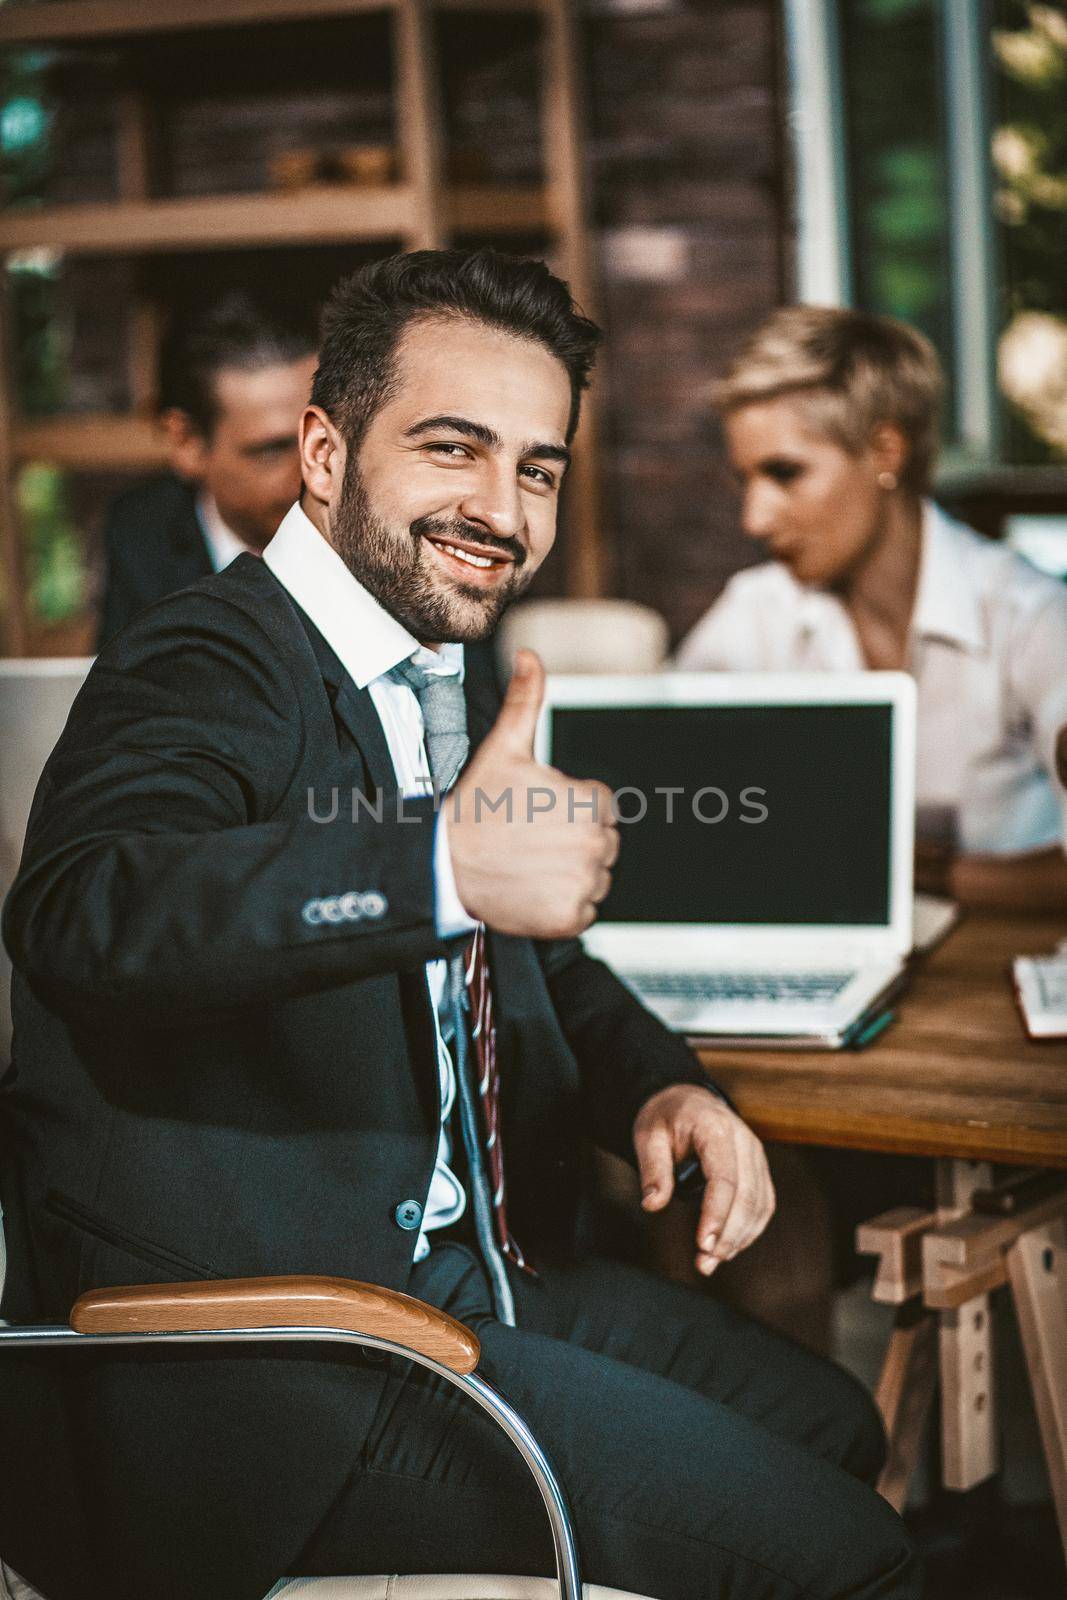 Well-dressed Smiling Man Showing Thumbs Up Gesture, Cheerful Businessman Show Thumbs Up Sign While Sitting At Meeting And Using Laptop, Business Success Concept, Toned Image